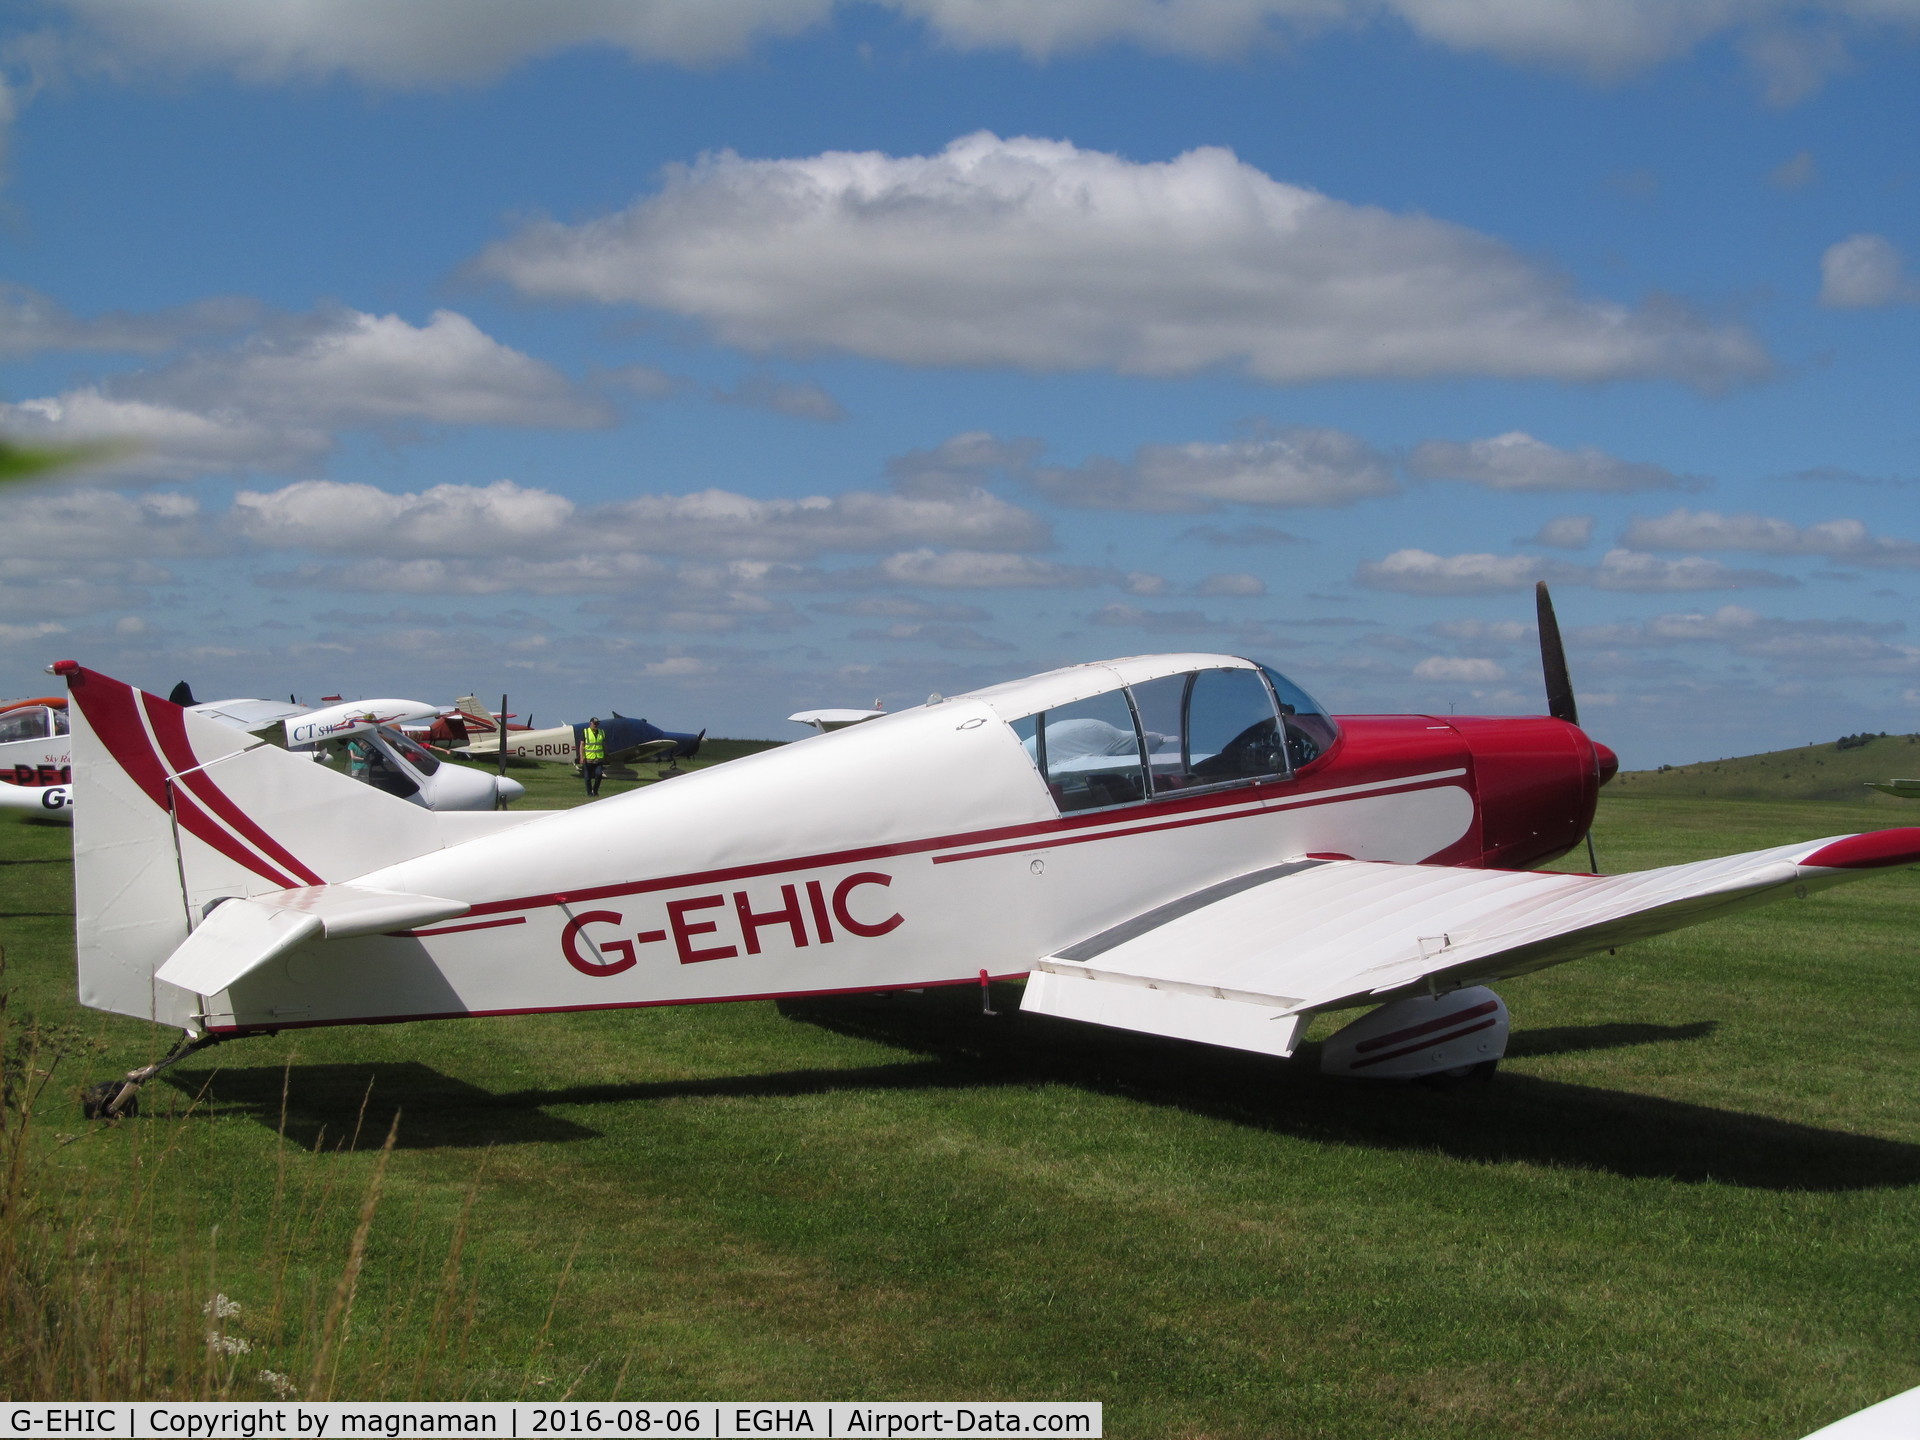 G-EHIC, 1961 Jodel D-140B Mousequetaire II C/N 53, unusual tail design